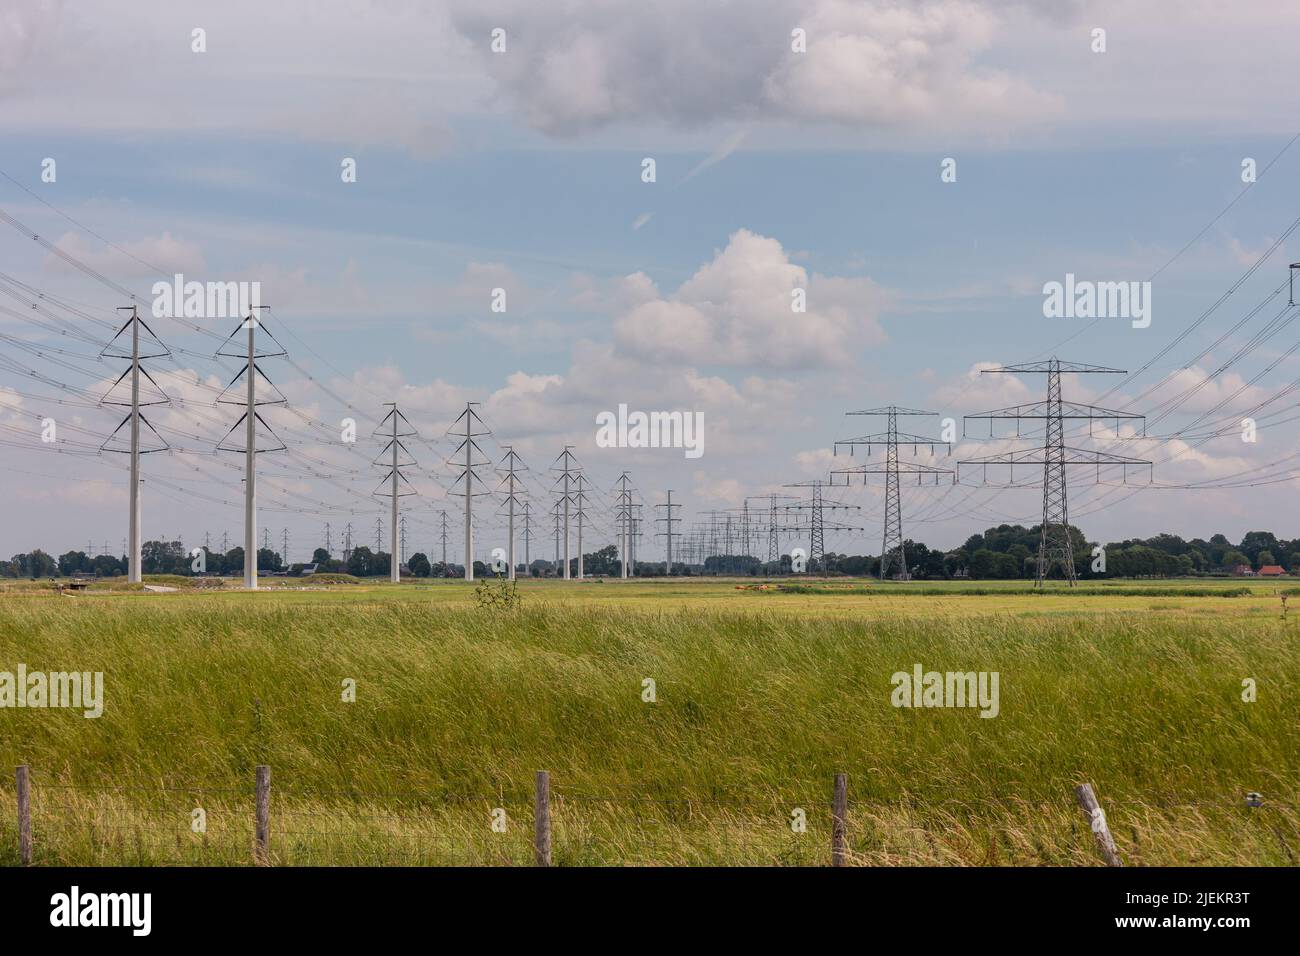 Expansion of the high-voltage grid with many high-voltage pylons to meet the growing demand for electricity, photo taken in the province of Groningen, Stock Photo